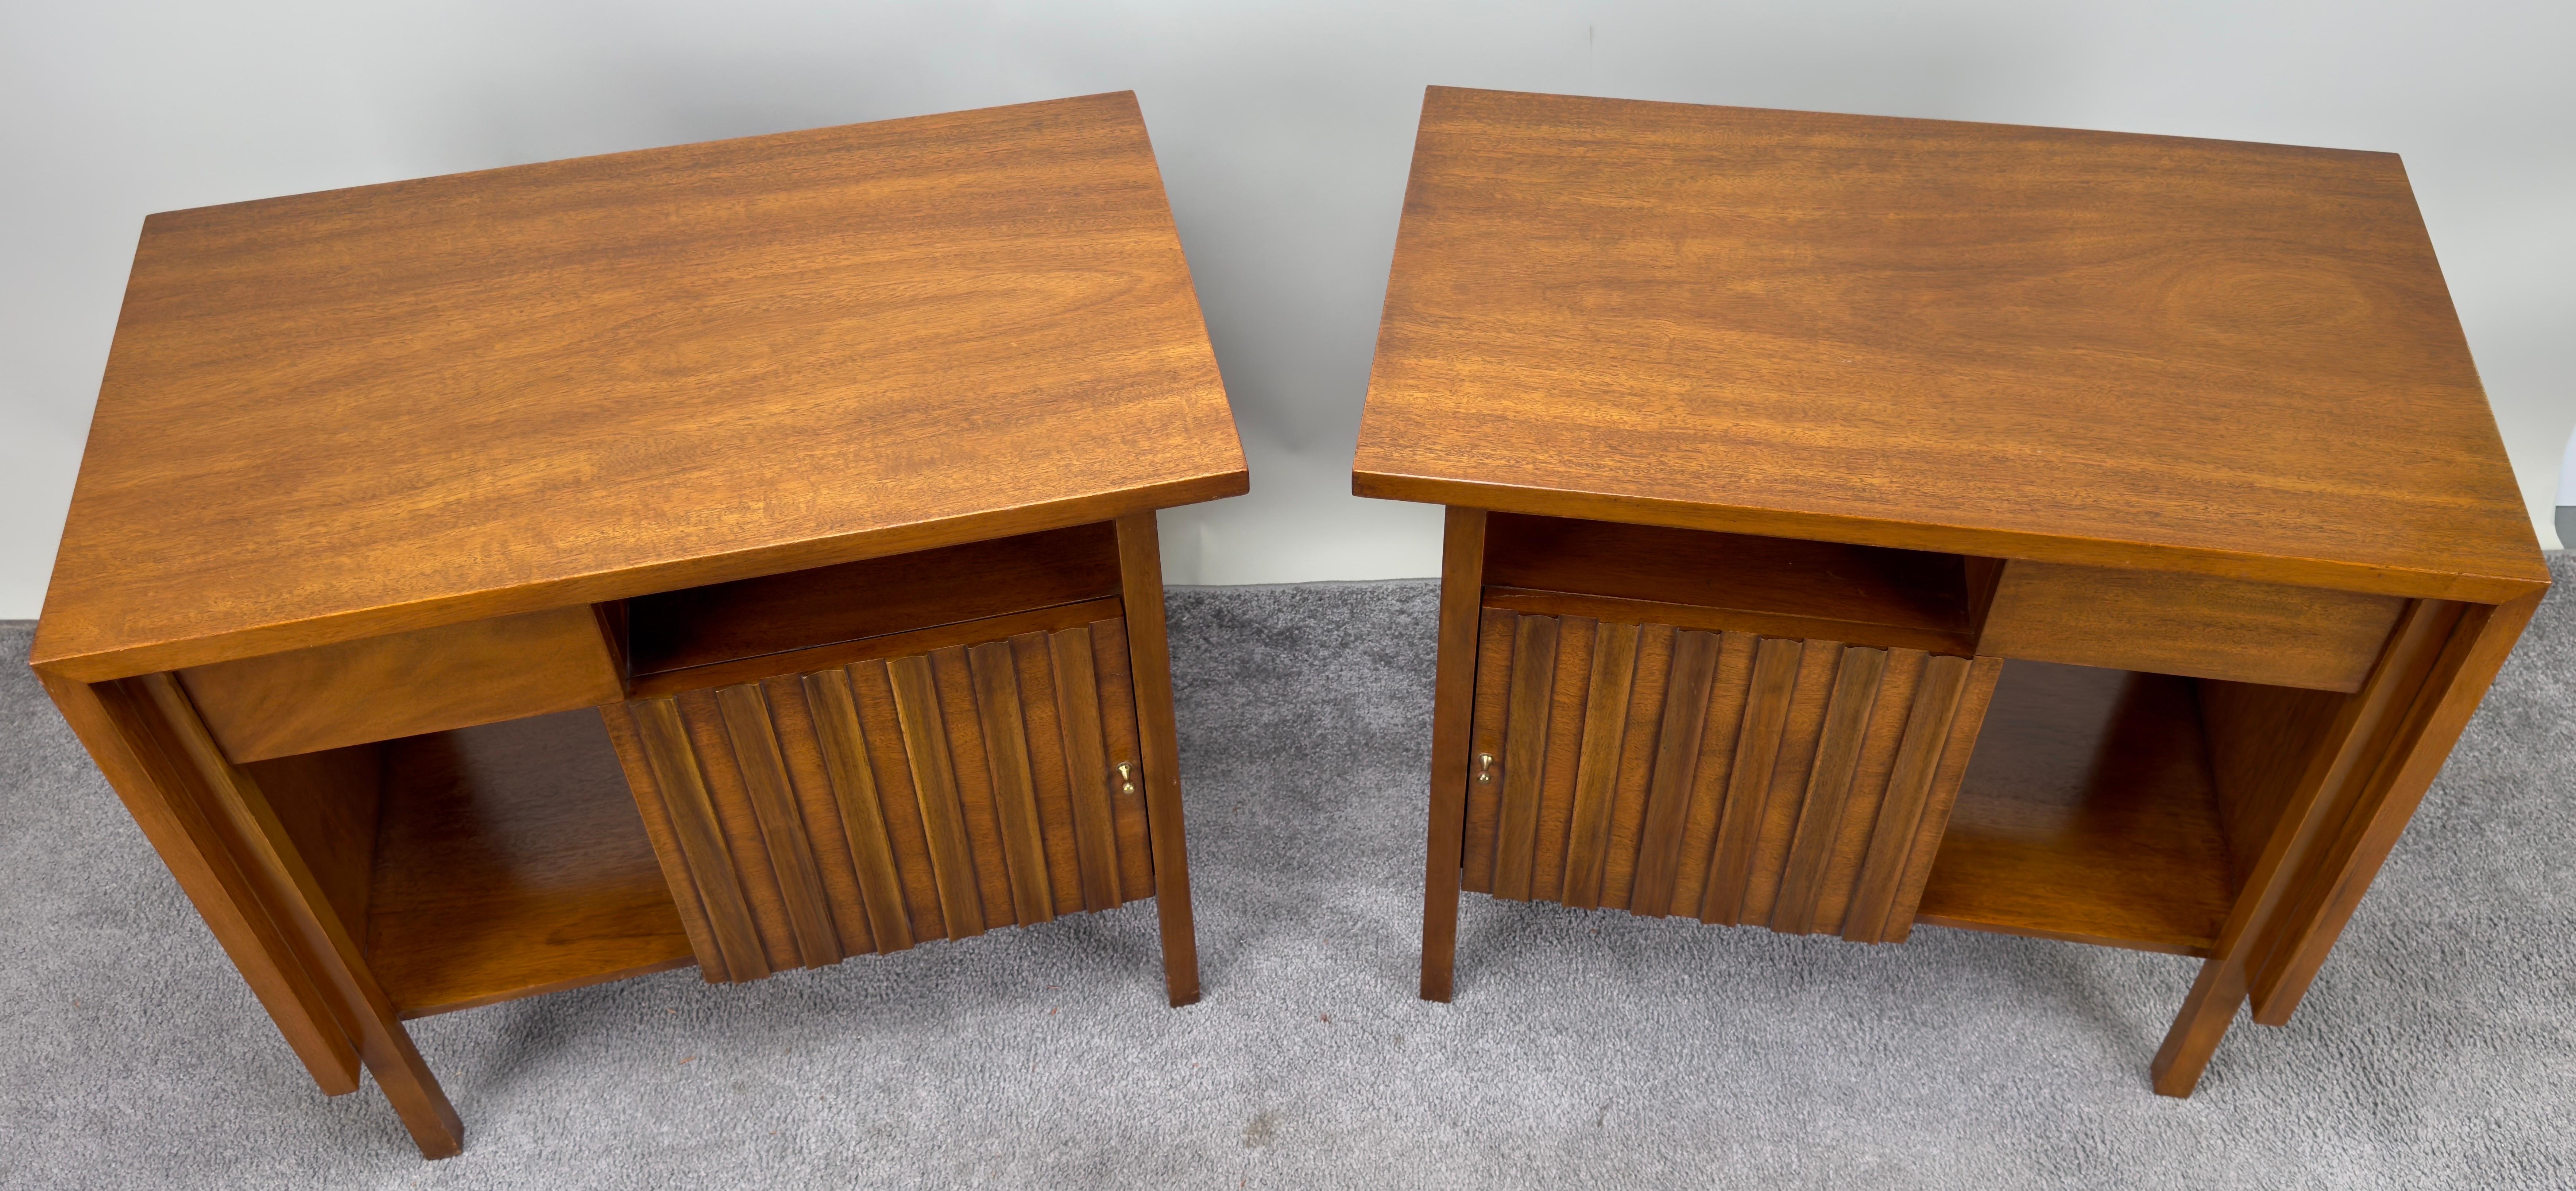 A pair of Mid Century Modern nightstands or end tables crafted with impeccable quality by the renowned John Widdicomb. These solid nightstands showcase a harmonious blend of form and function. Each nightstand boasts a thoughtfully designed